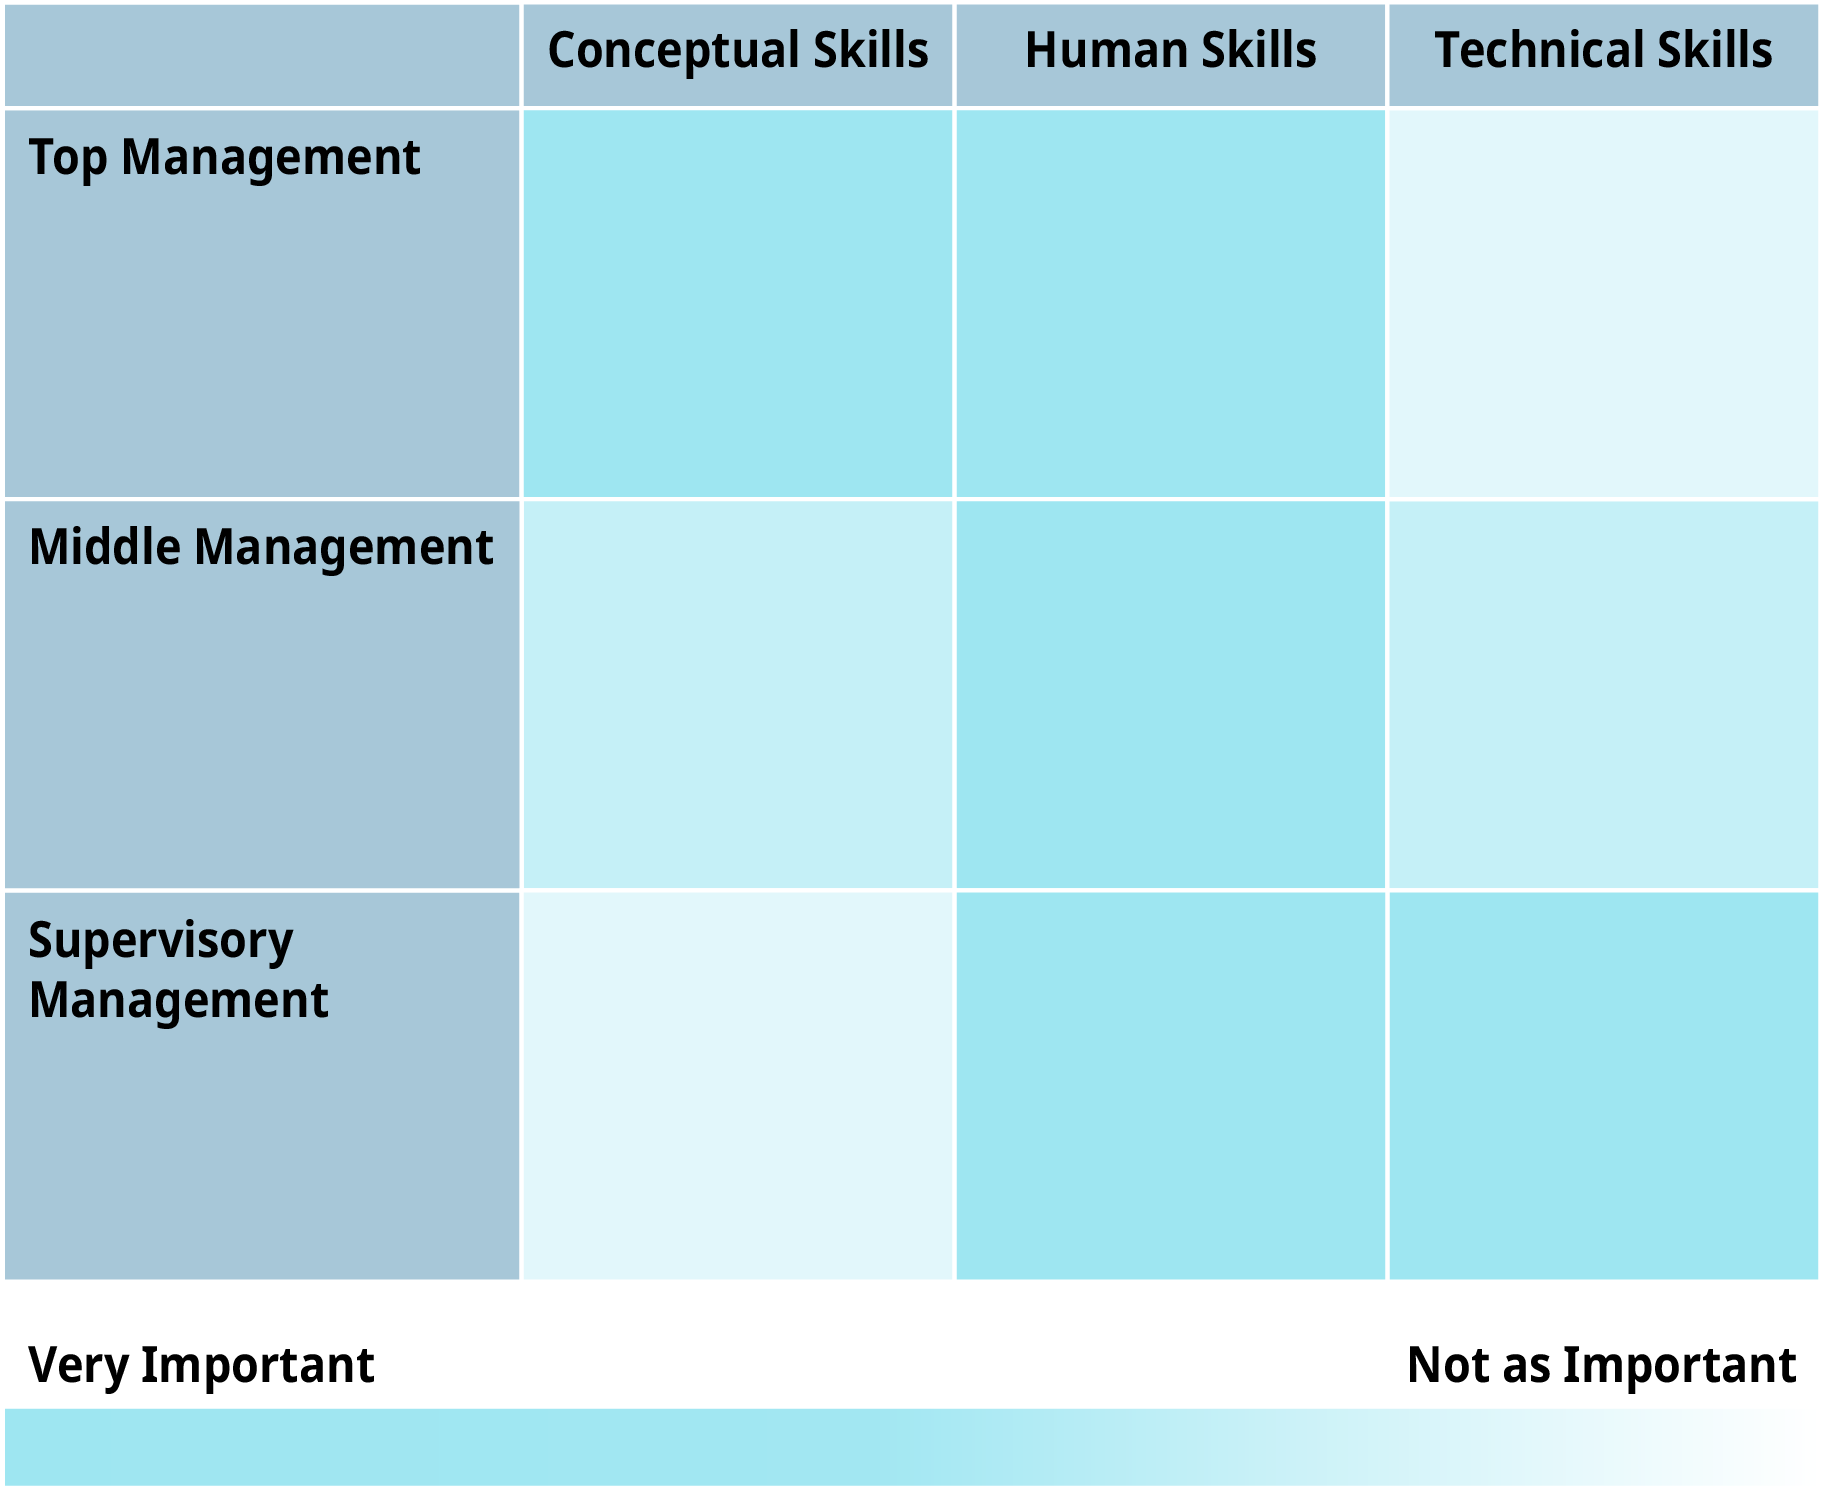 From left to right, the first column is conceptual skills. The second column is human skills. The third column is technical skills. From top to bottom, the first row is top management. The second row is middle management. The bottom row is supervisory management. At the bottom of the table, at the left hand side, is labeled as very important. On the bottom of the right side of the table is labeled as not as important.